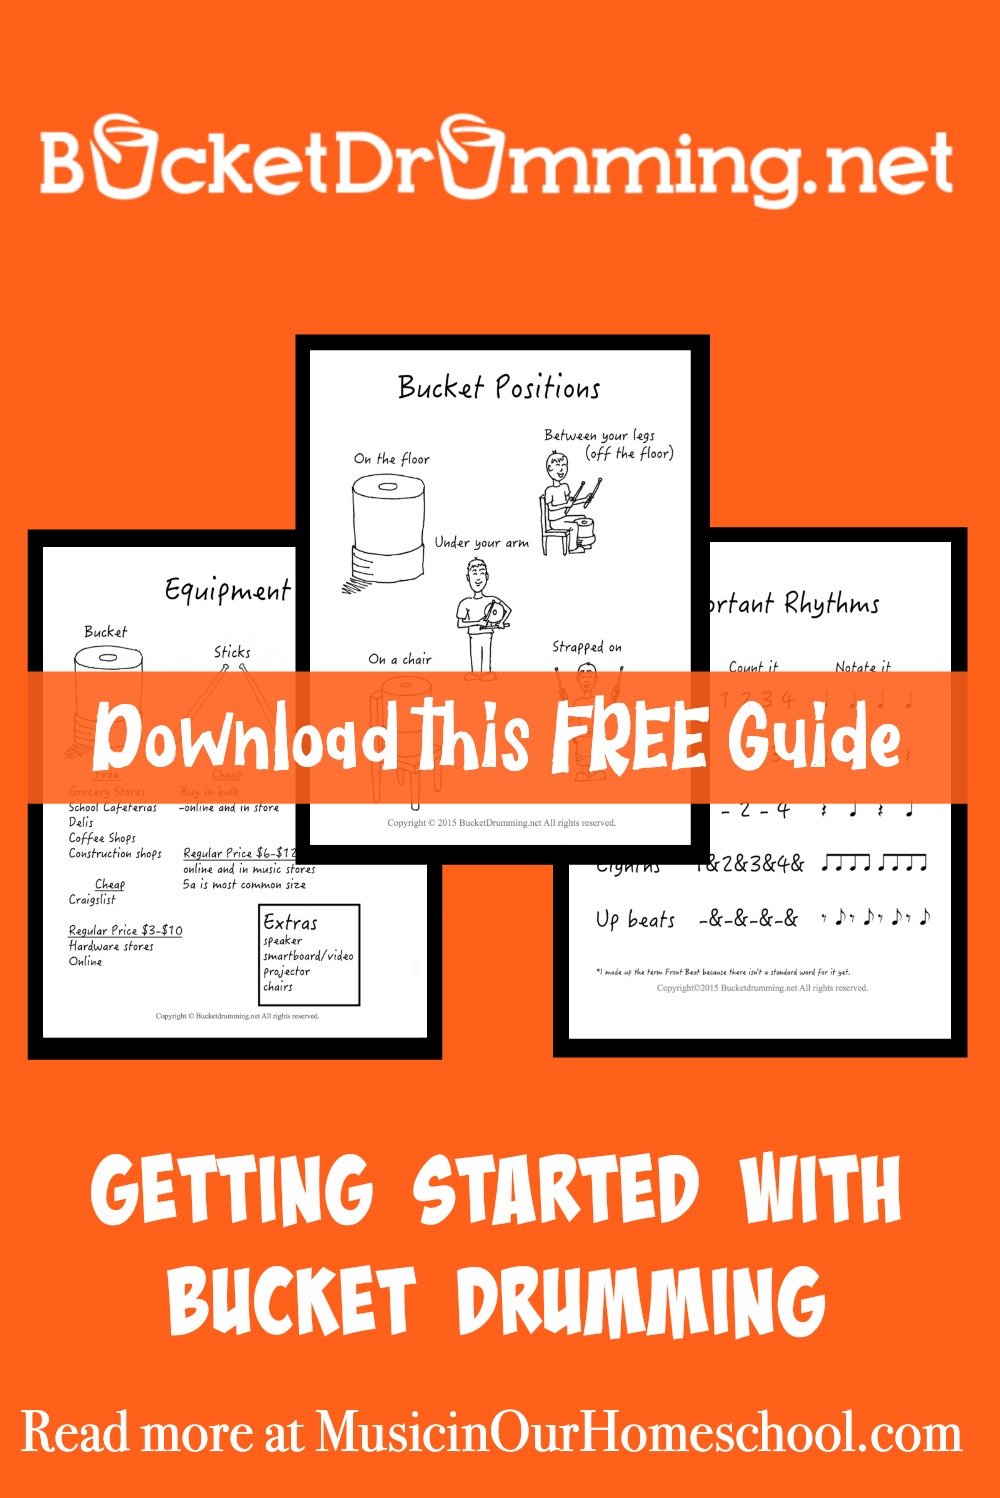 "Getting Started With Bucket Drumming" is a free guide you can download from bucketdrumming.net. The Incredible Benefits of Including Bucket Drumming in your Homeschool #bucketdrumming #homeschoolmusic #musicinourhomeschool #musiclessonsforkids